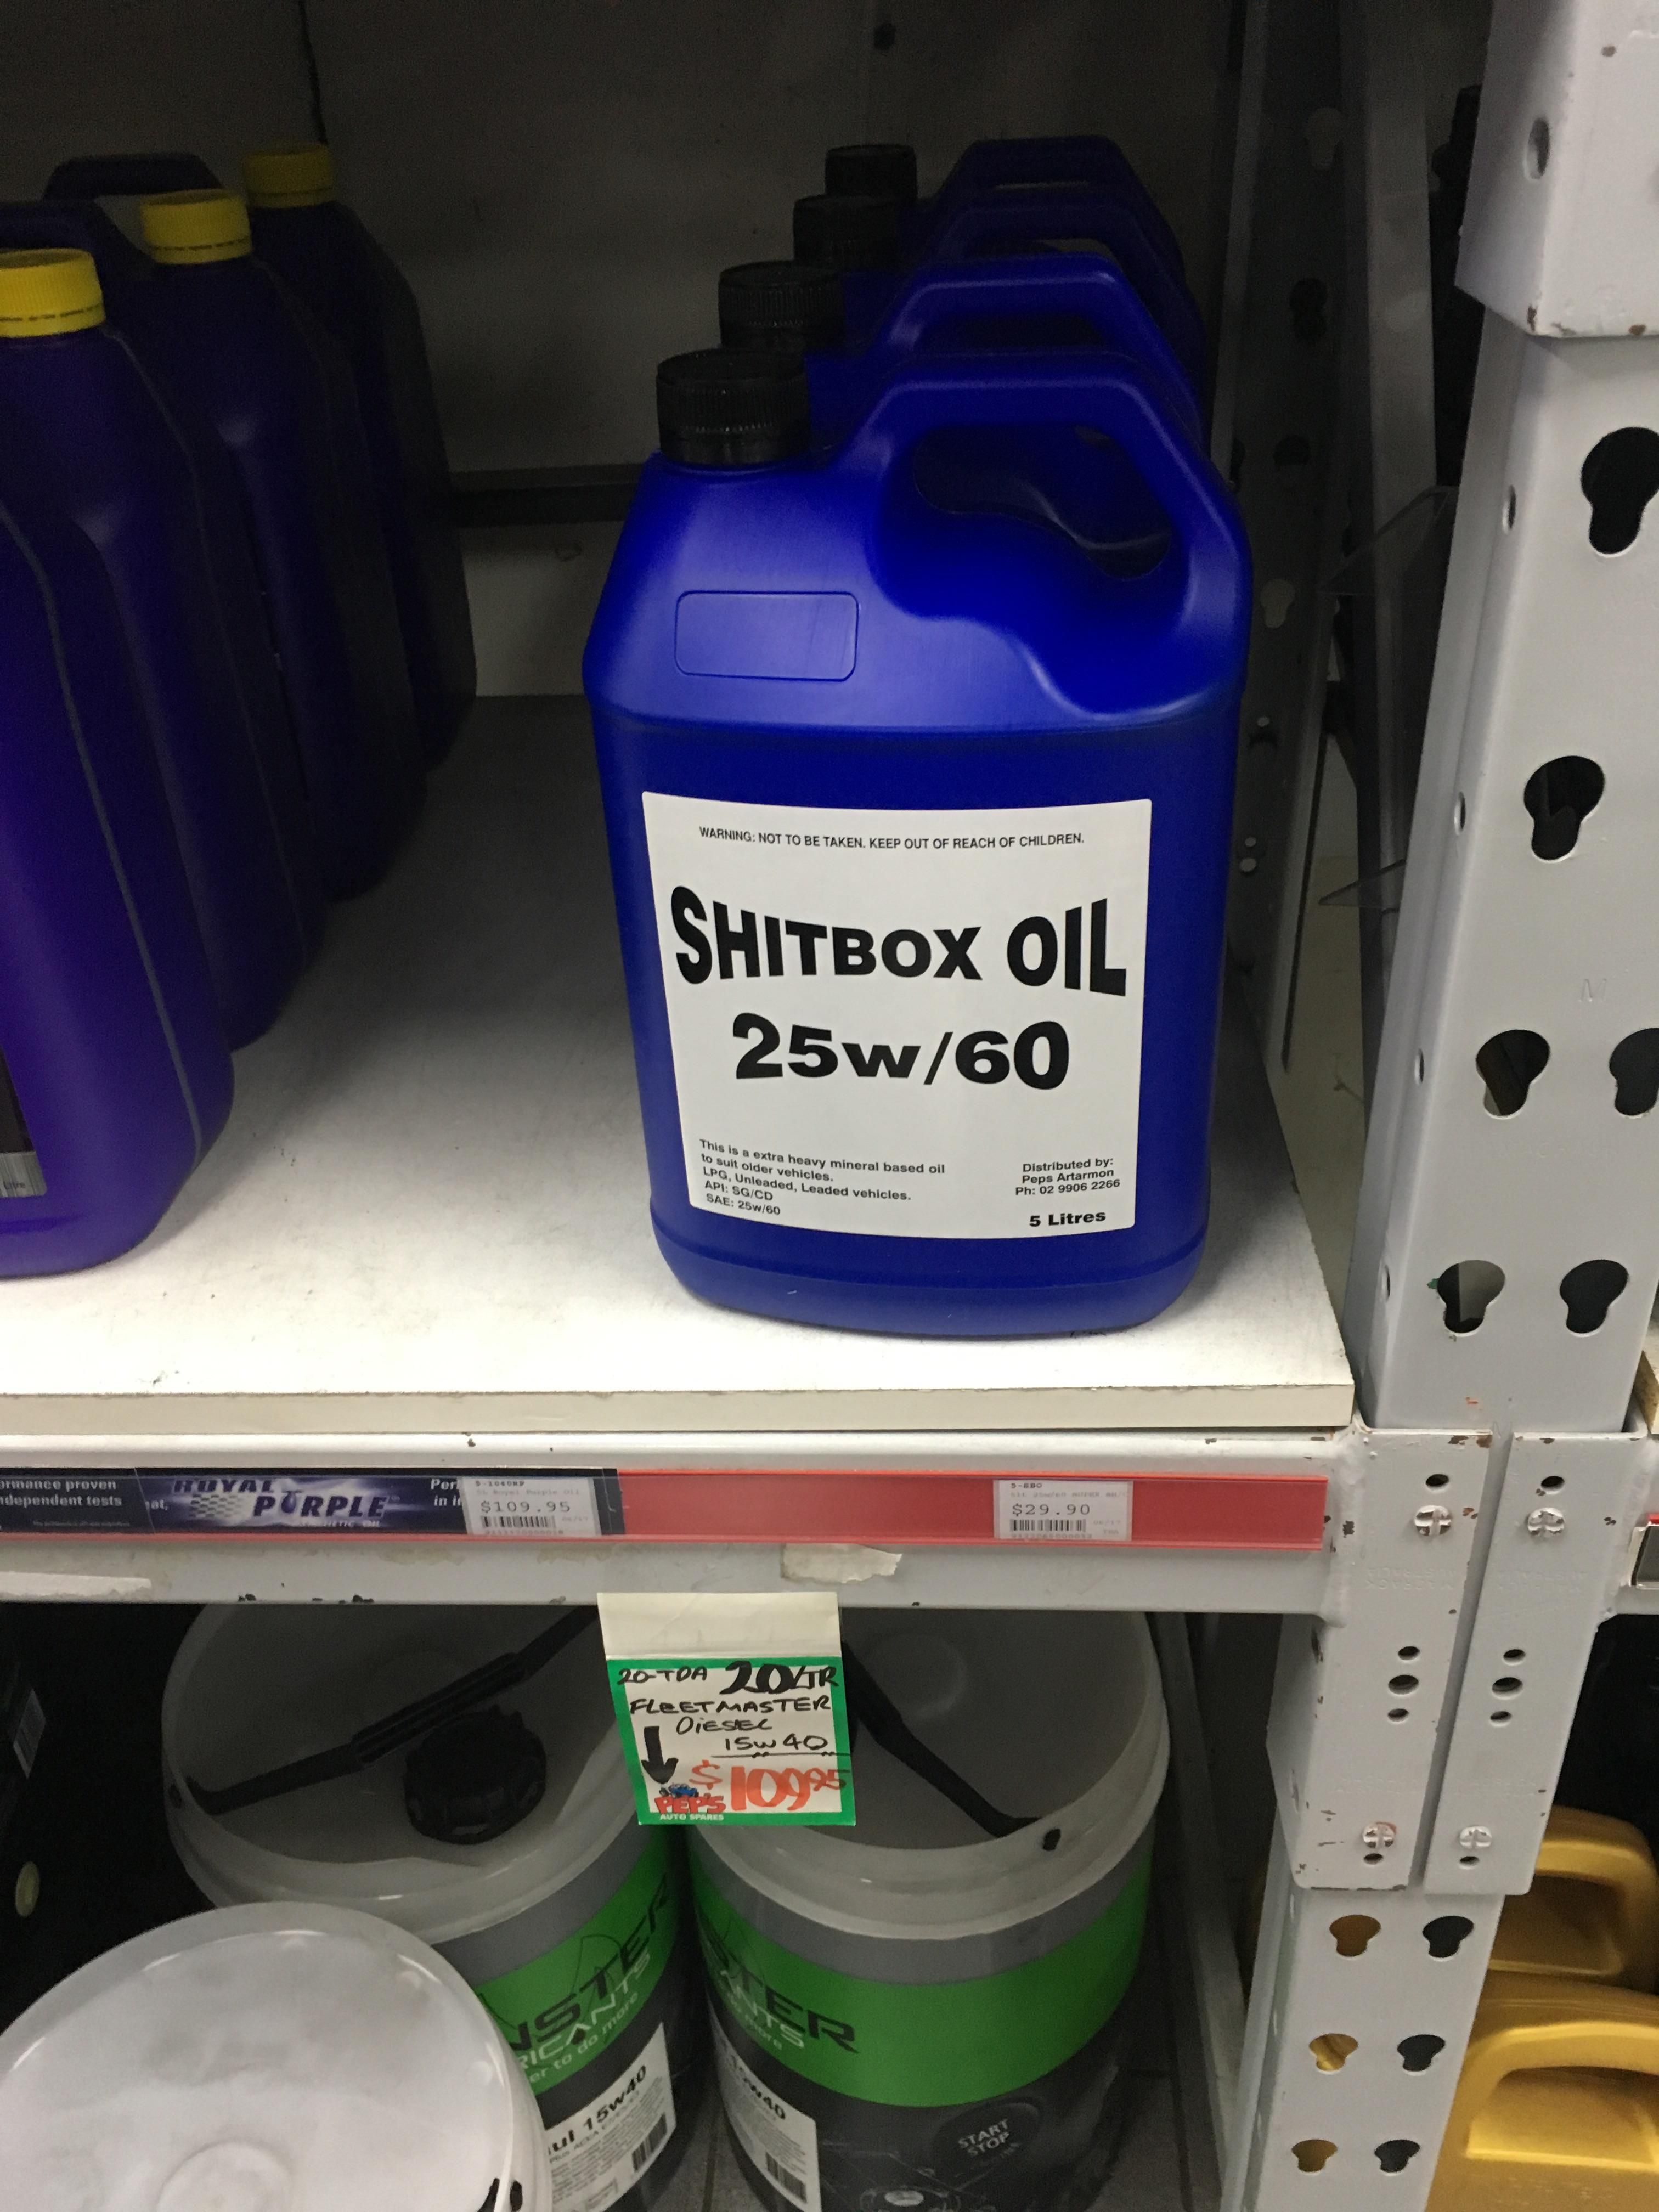 I was looking for oil for my car when I came across this beauty.